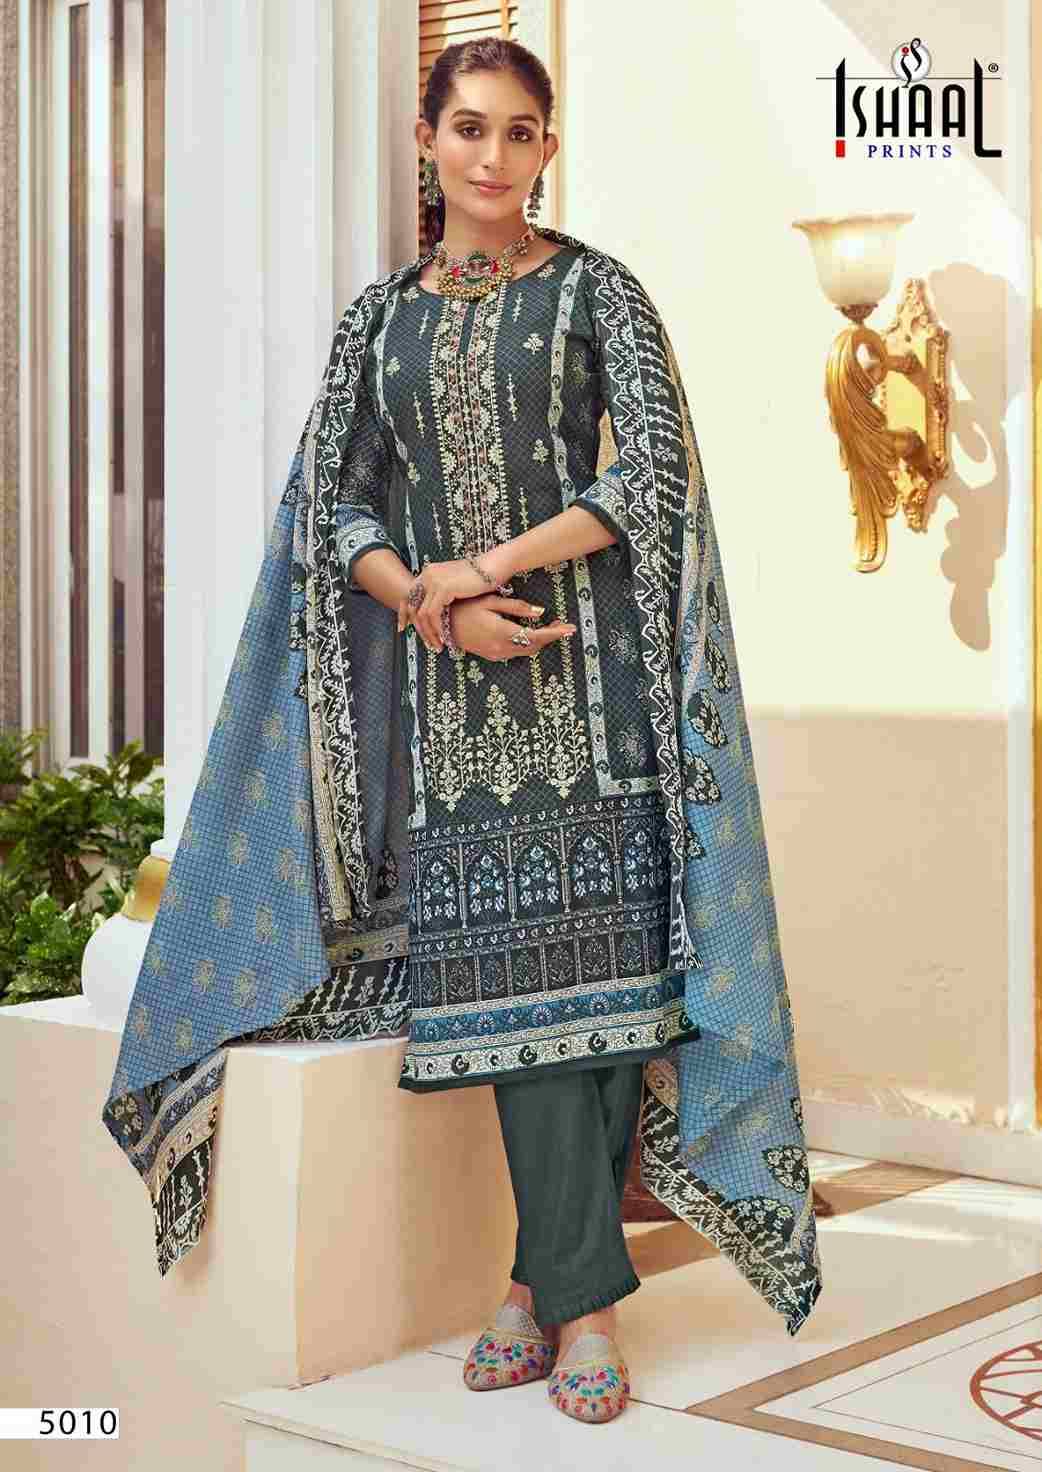 Embroidered Vol-5 By Ishaal Prints 5001 To 5010 Series Beautiful Suits Colorful Stylish Fancy Casual Wear & Ethnic Wear Pure Lawn Printed Dresses At Wholesale Price